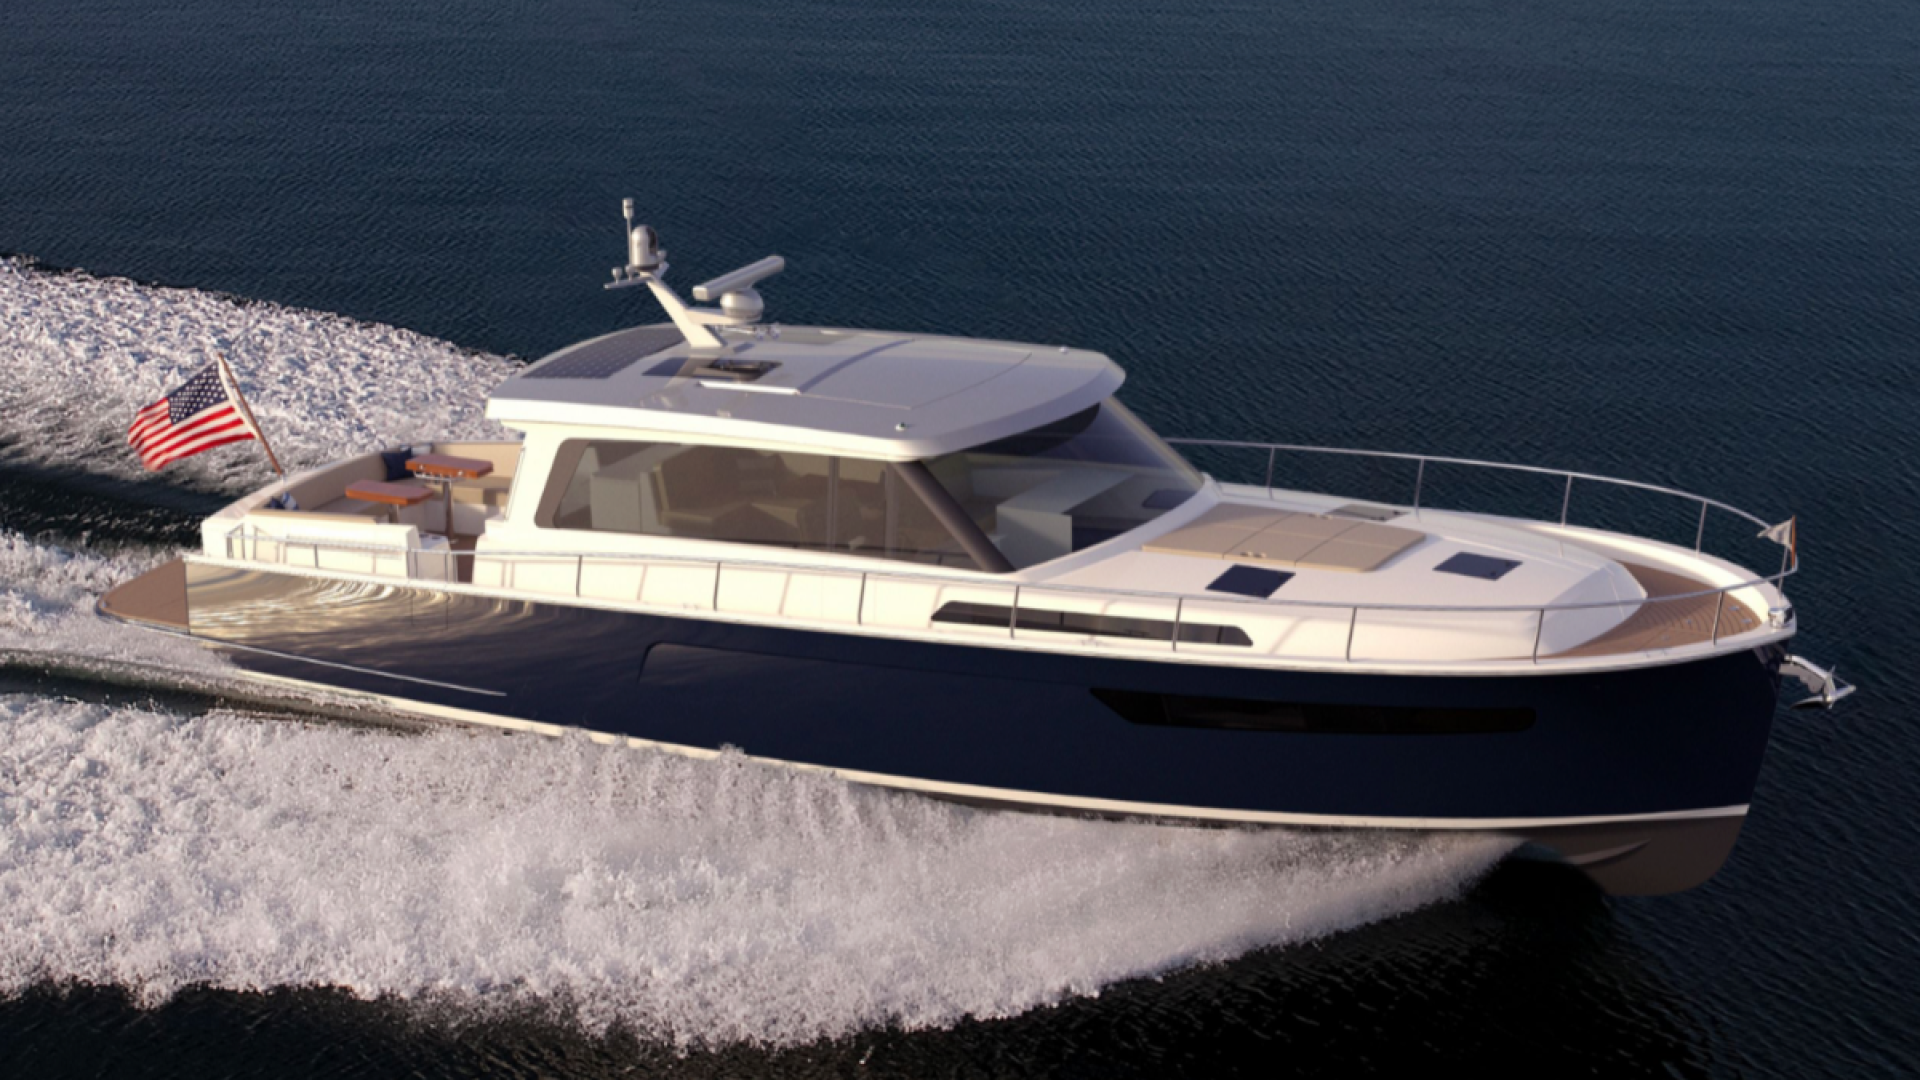 Boston Boatworks to launch new BB52 Offshore Express Cruiser